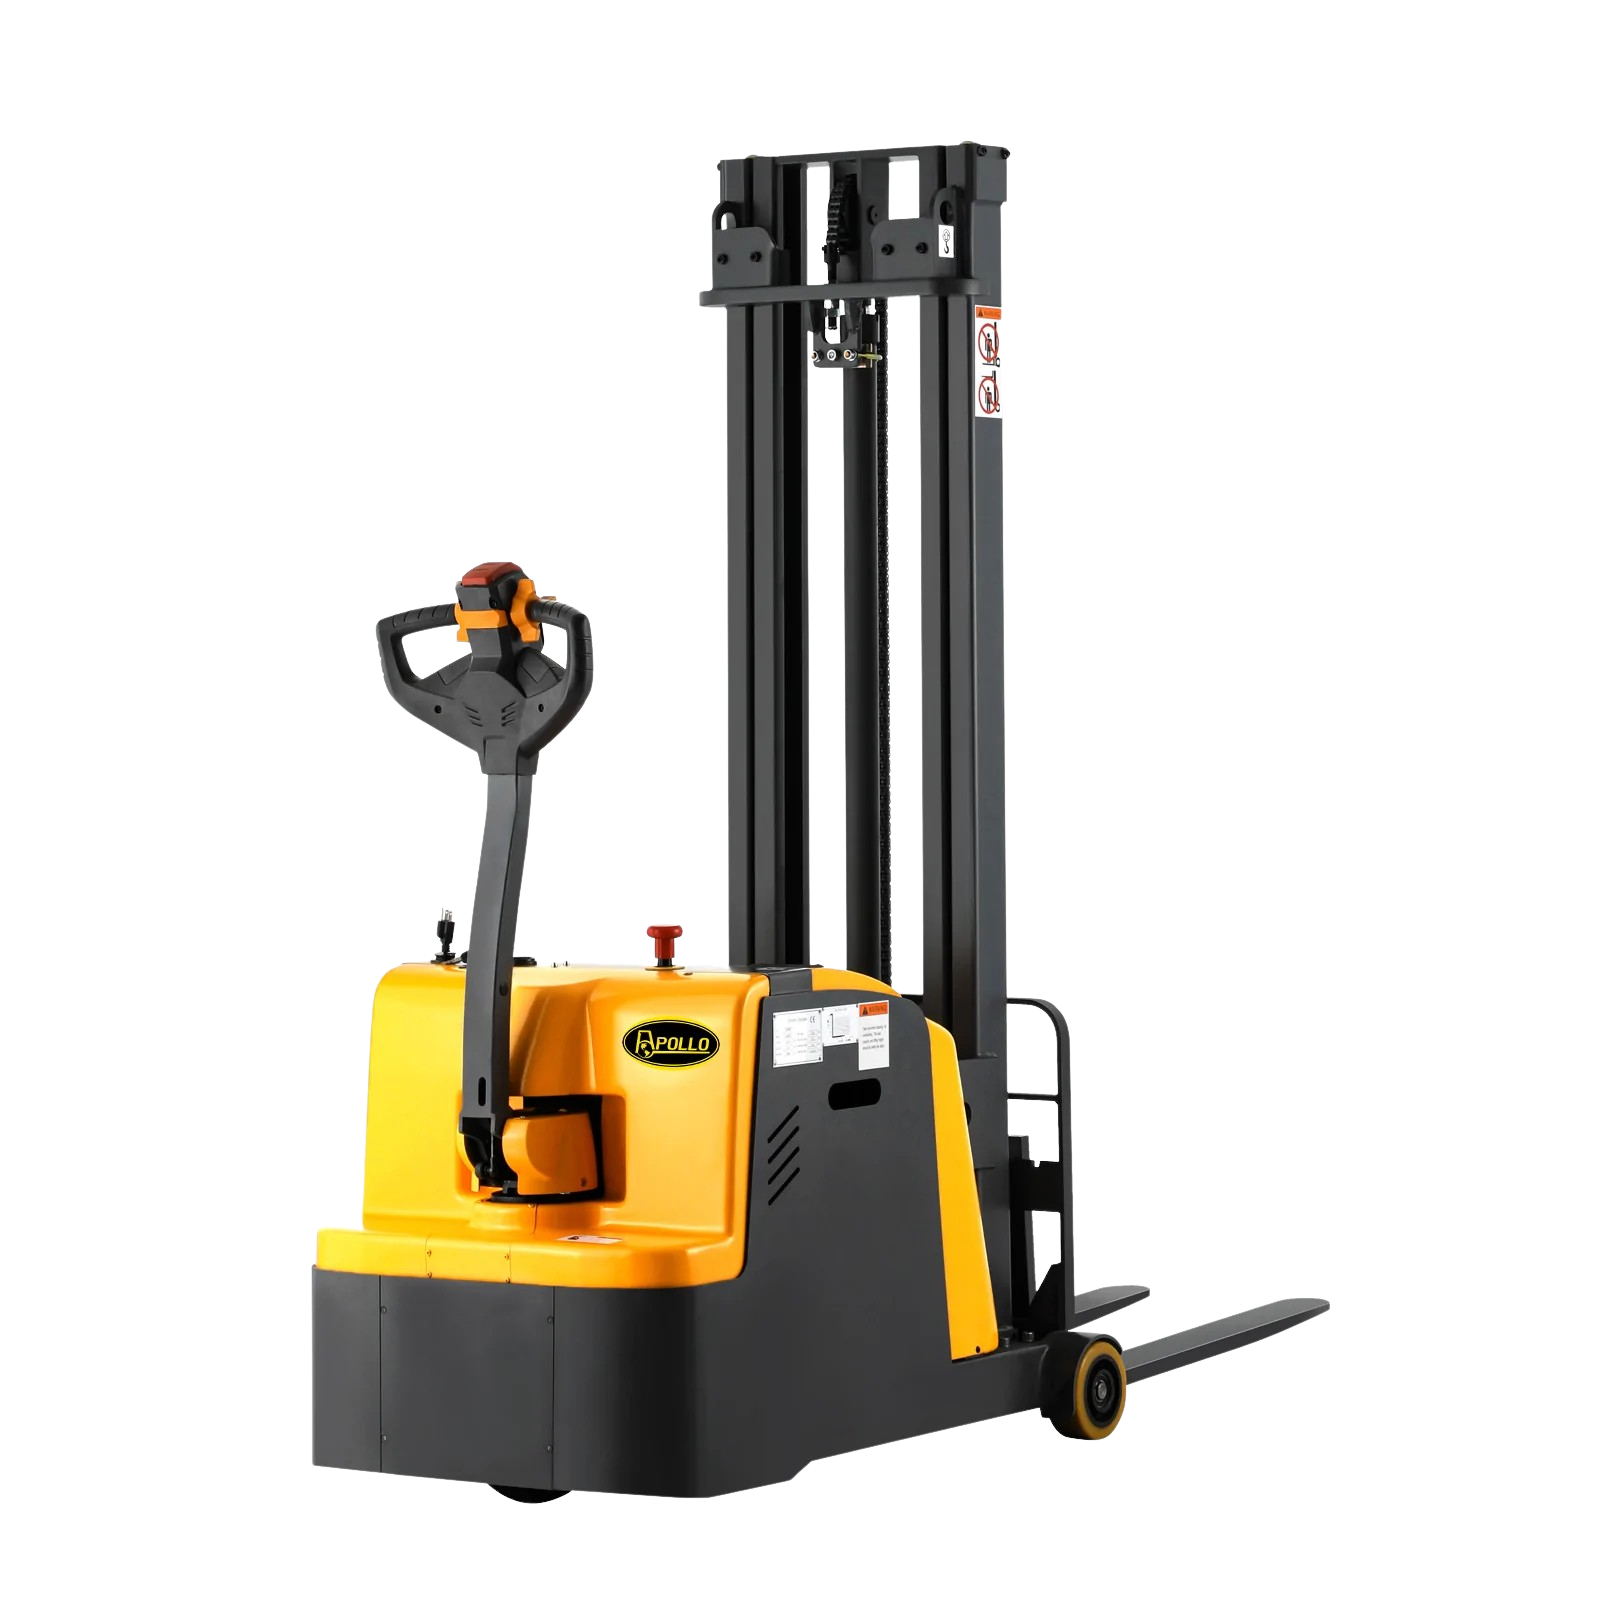 Apollolift, Apollolift A-3040 Counterbalanced Electric Stacker 118" Lifting Height 2200 lbs. Capacity New